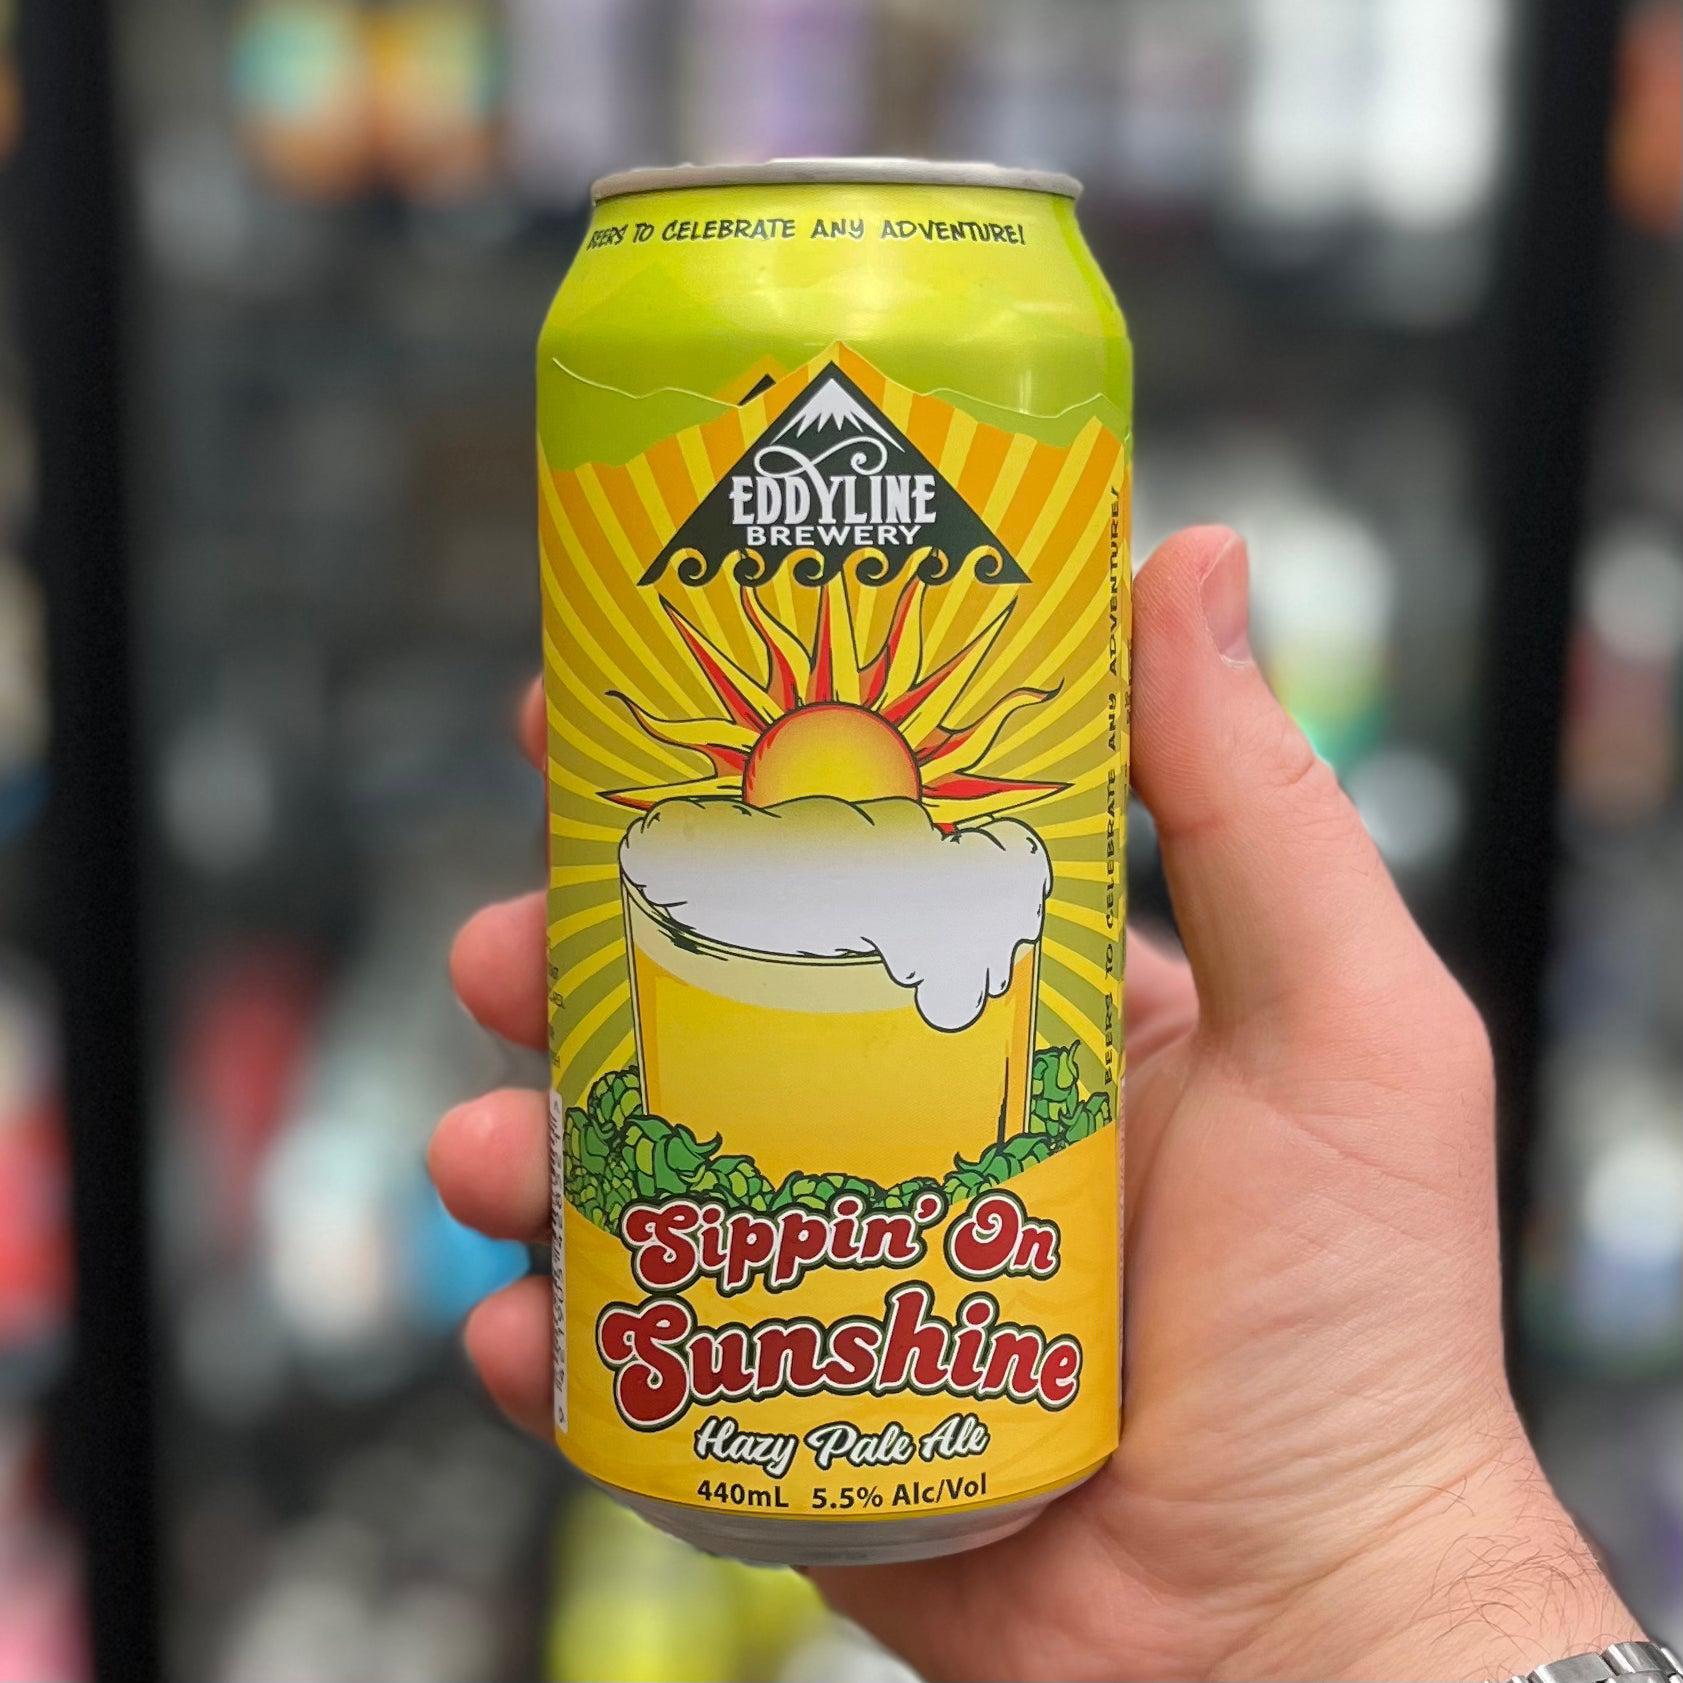 Eddyline-Sippin' On Sunshine Hazy Pale Ale-Hazy IPA: - The Beer Library